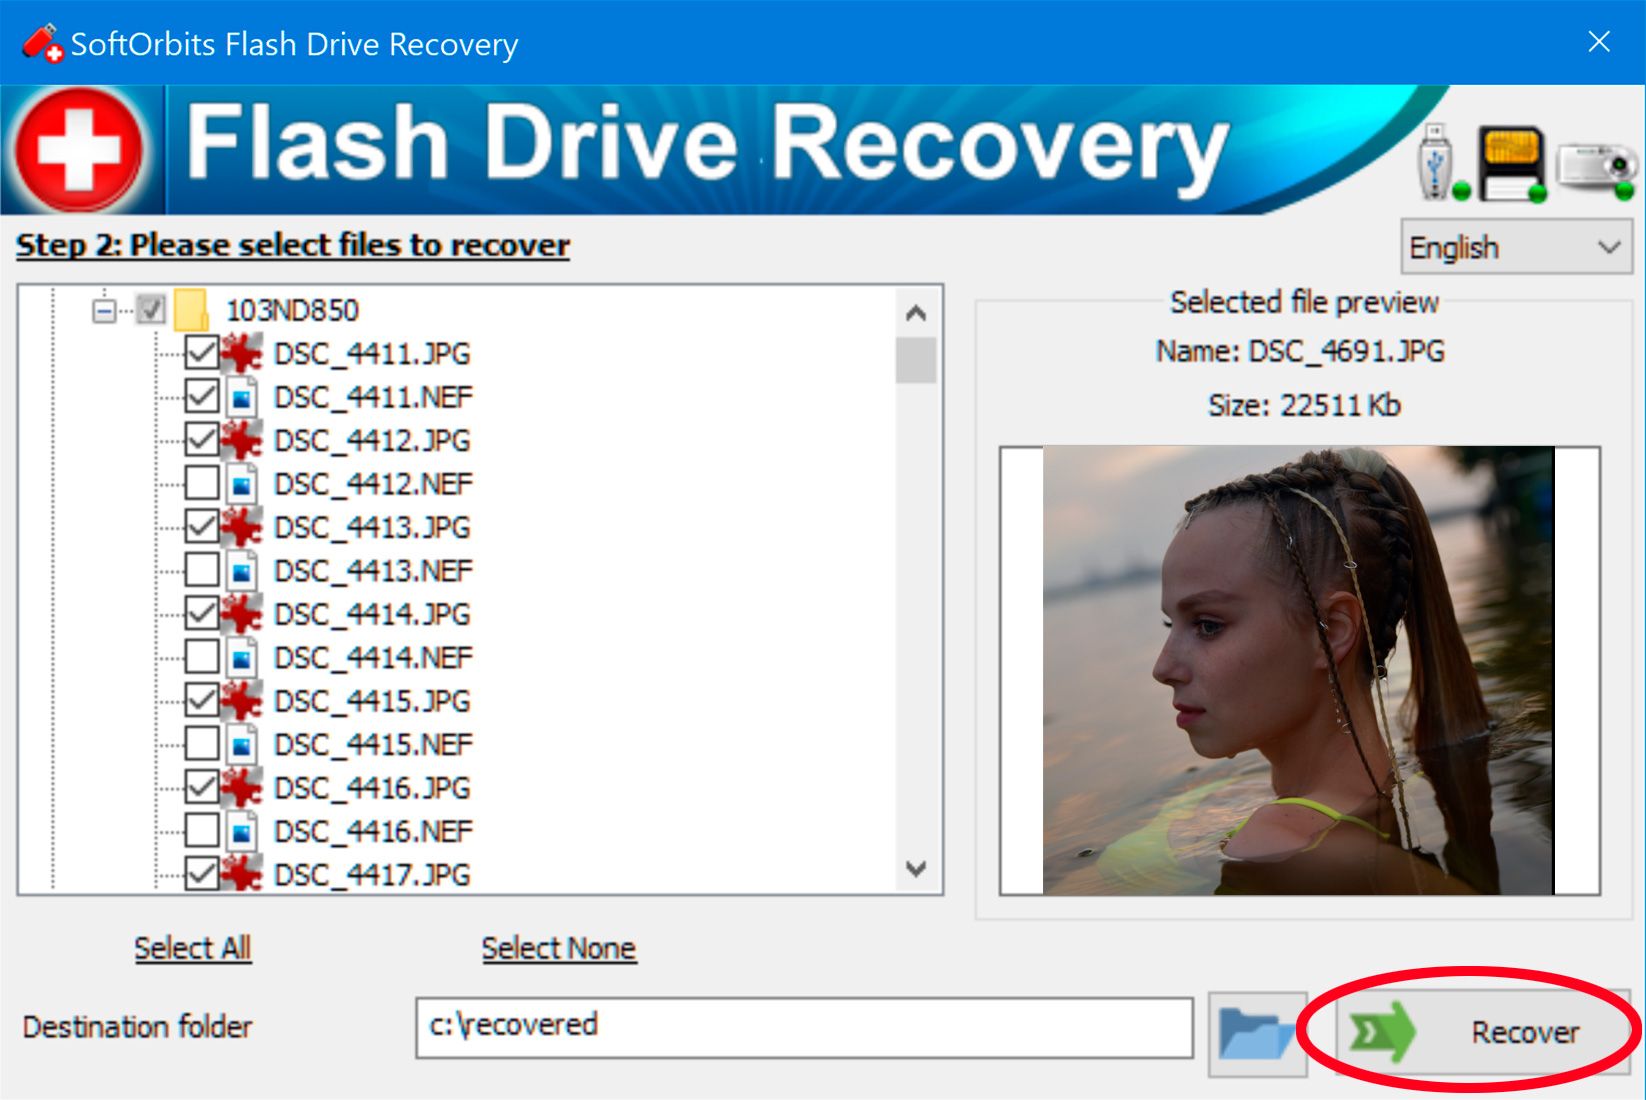 Save the Recovered Files..